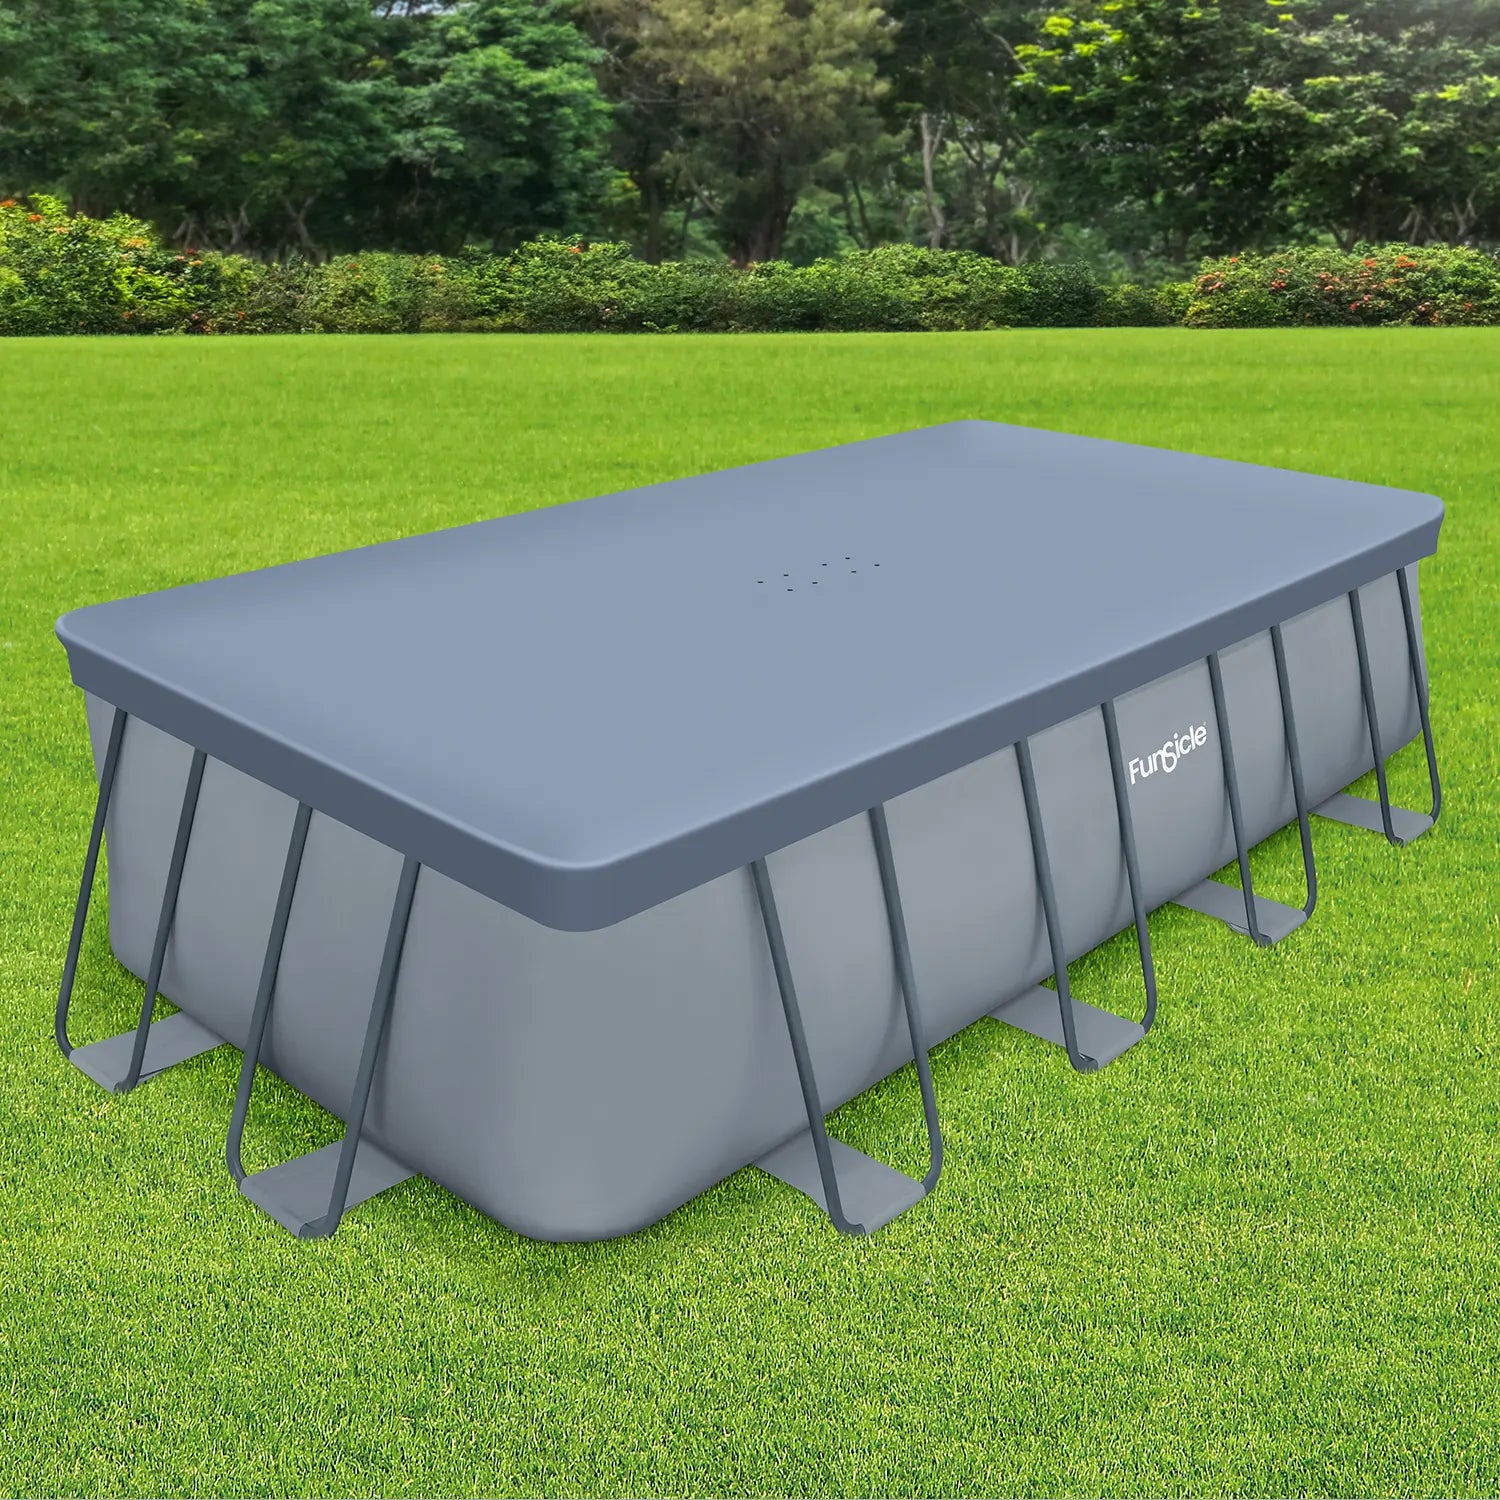 Funsicle 16ft x 8ft Rectangular Frame Pool Cover on grass background